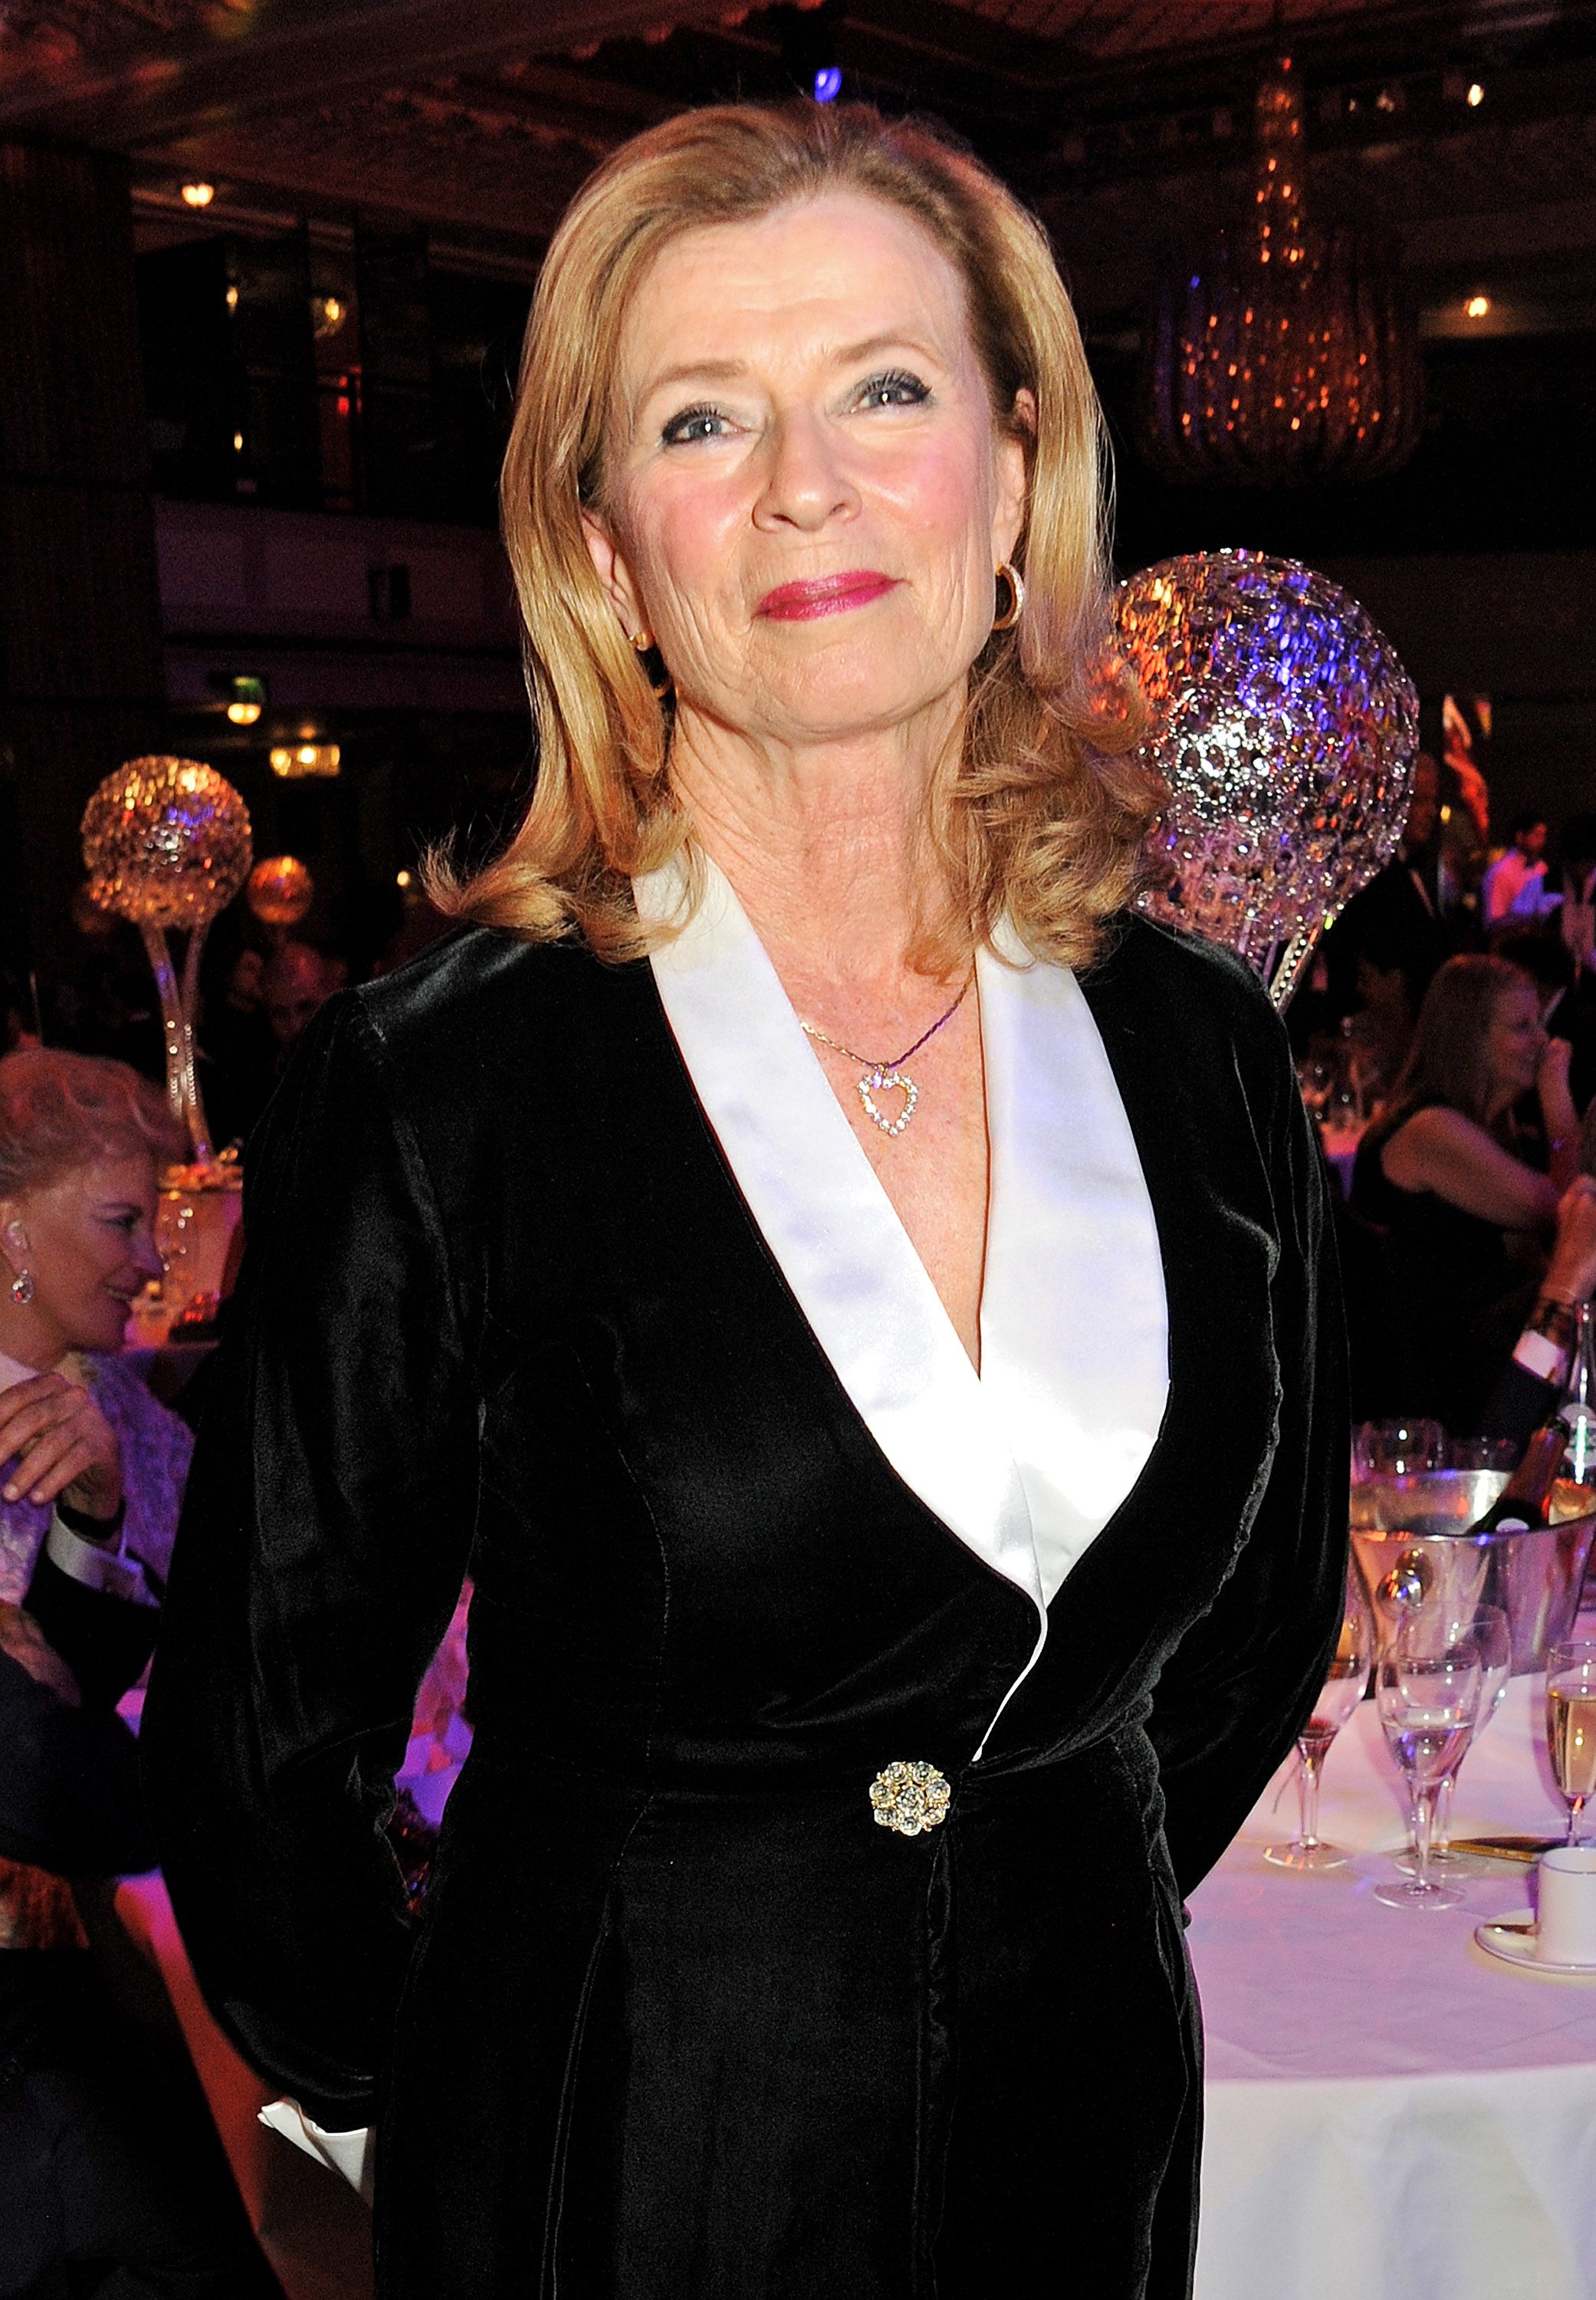  The widow of Bruce Lee, Linda Lee Cadwell, at The Asian Awards in 2013 in London | Source: Getty Images